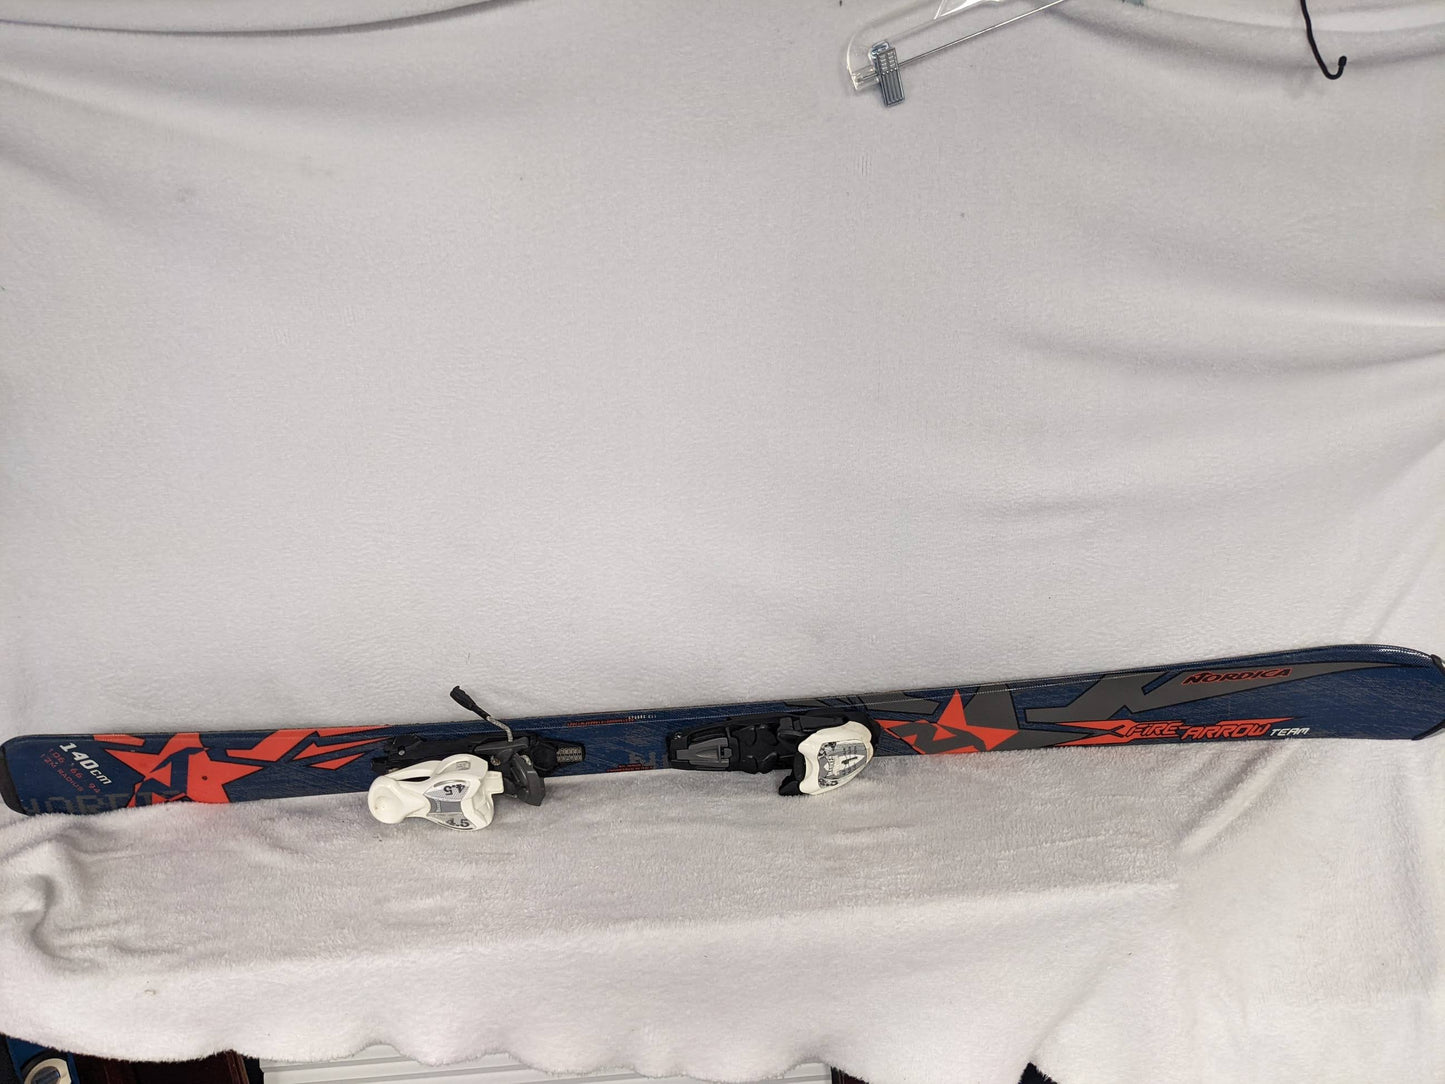 Nordica Fire Arrow Team Skis w/Marker Bindings Size 140 cm Color Blue Condition Used